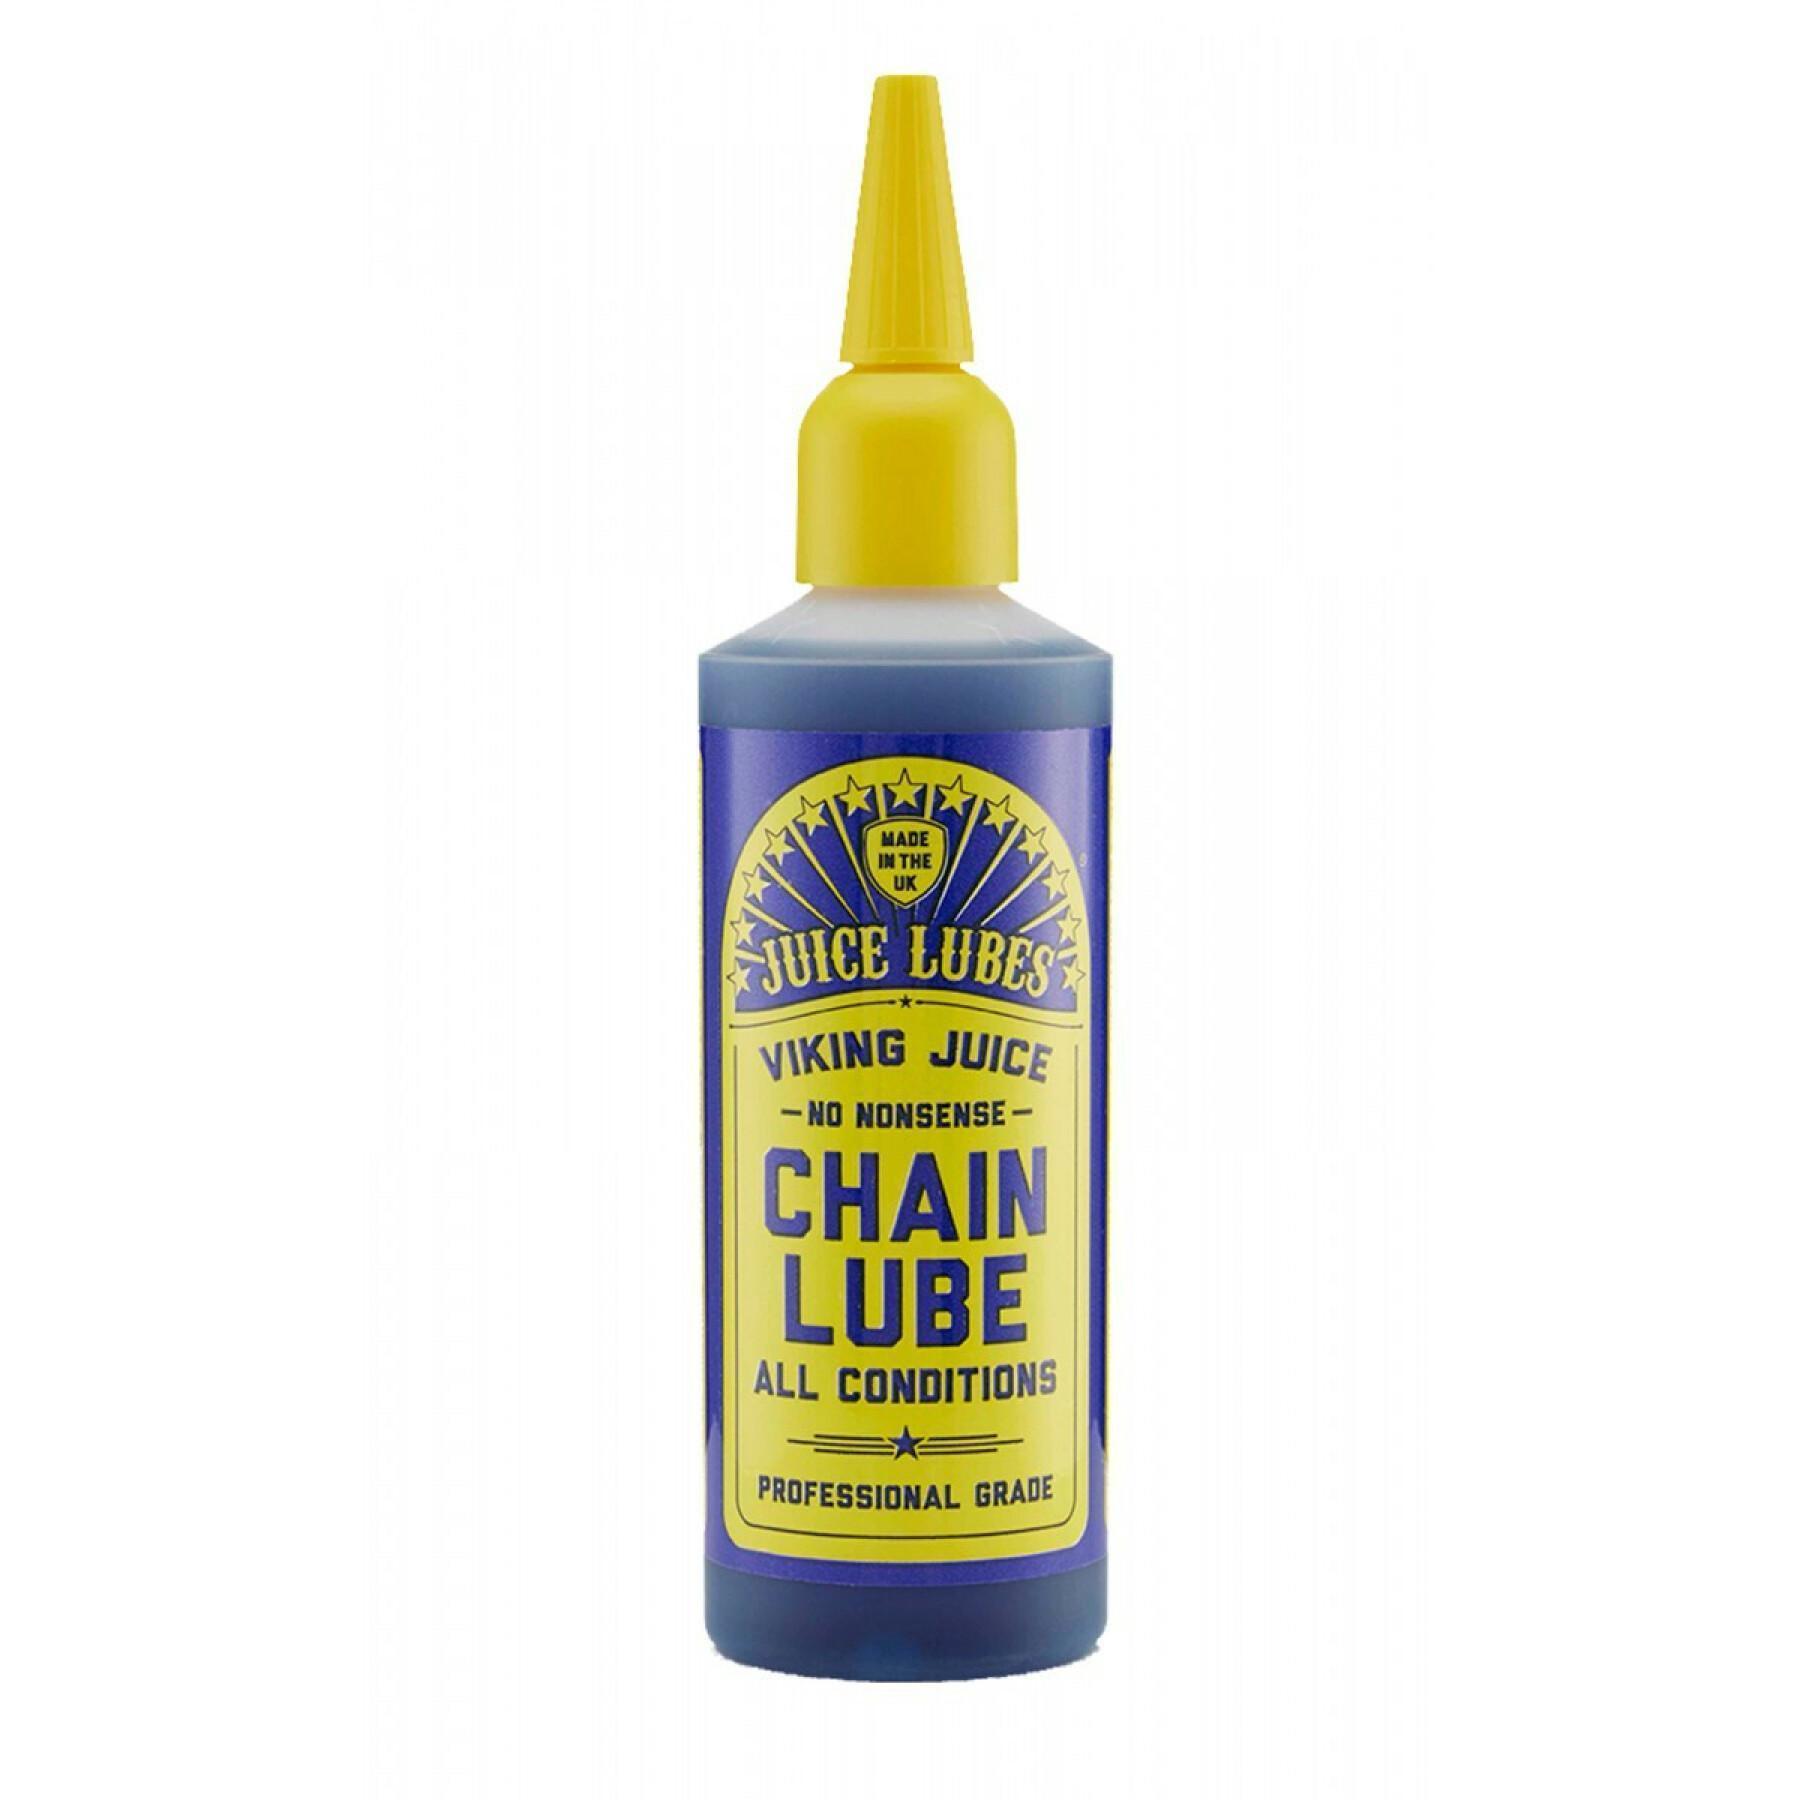 Chain lubricant Juice Lubes Viking